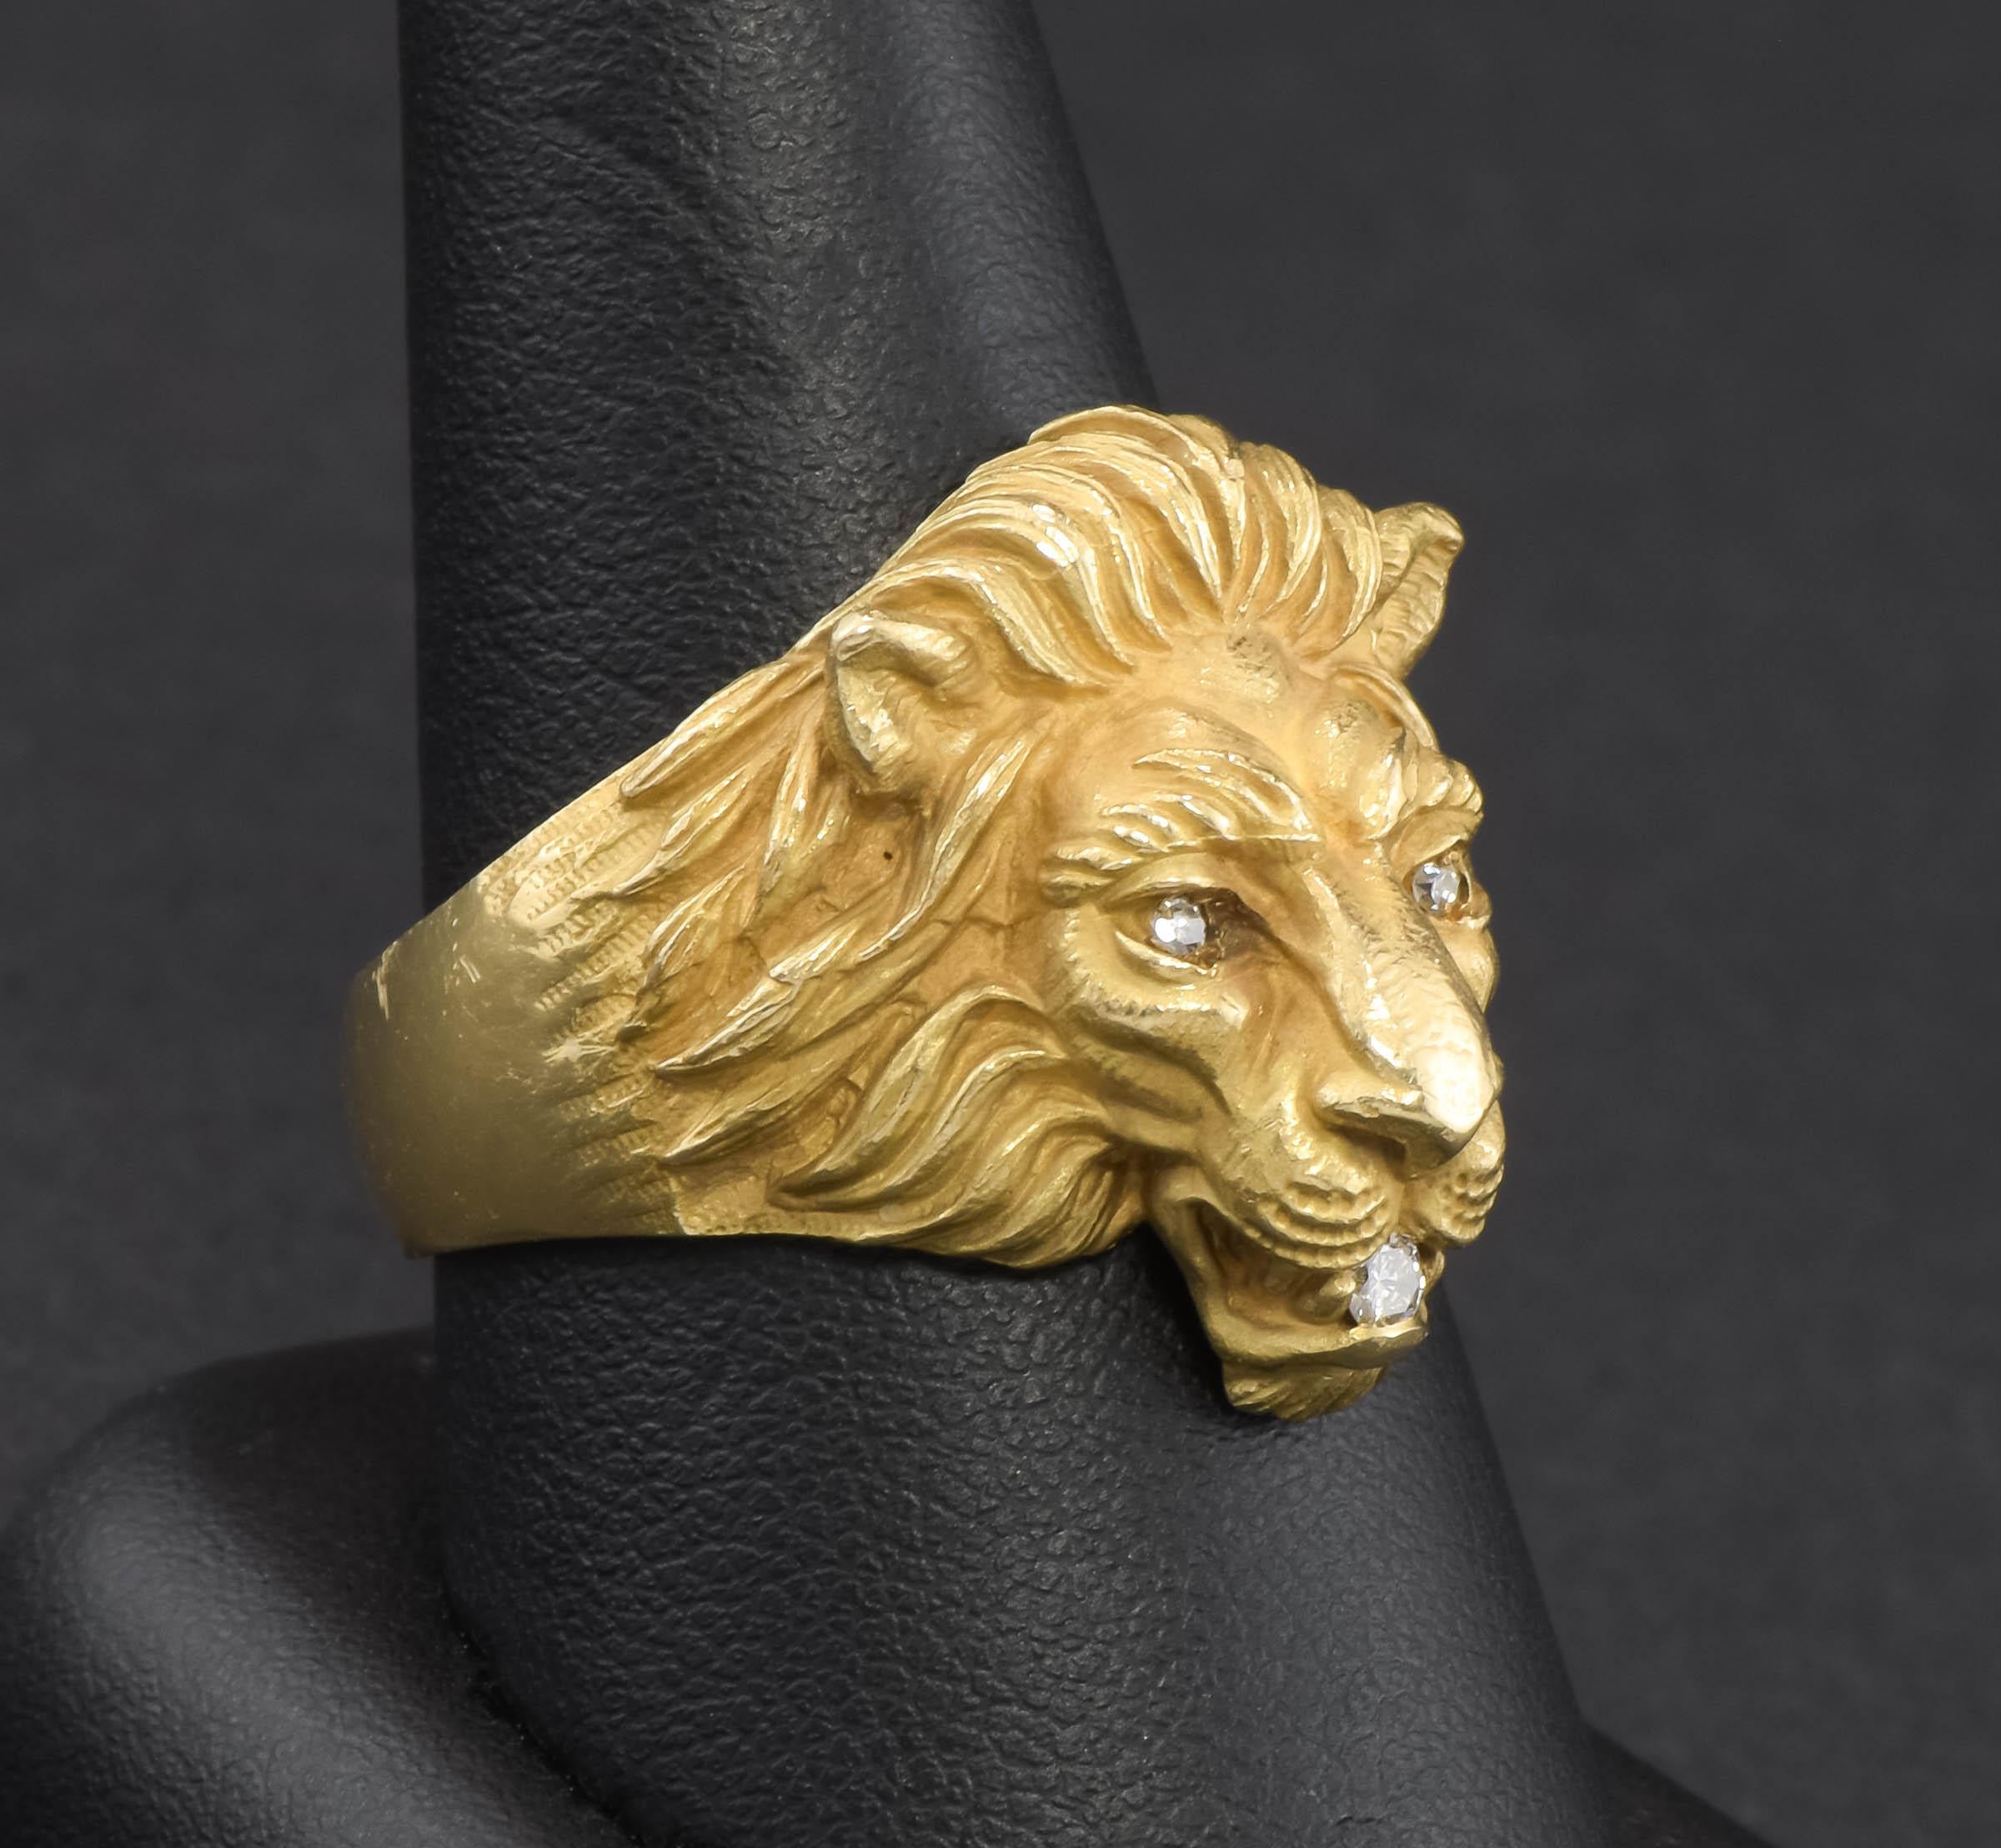 I'm delighted to offer one of Baumstein Feder's original gold Lion rings from the 1950's.  Many manufacturers made inferior copies of this magnificent lion over the years, and when you see the wonderful details and impressive presence of this ring